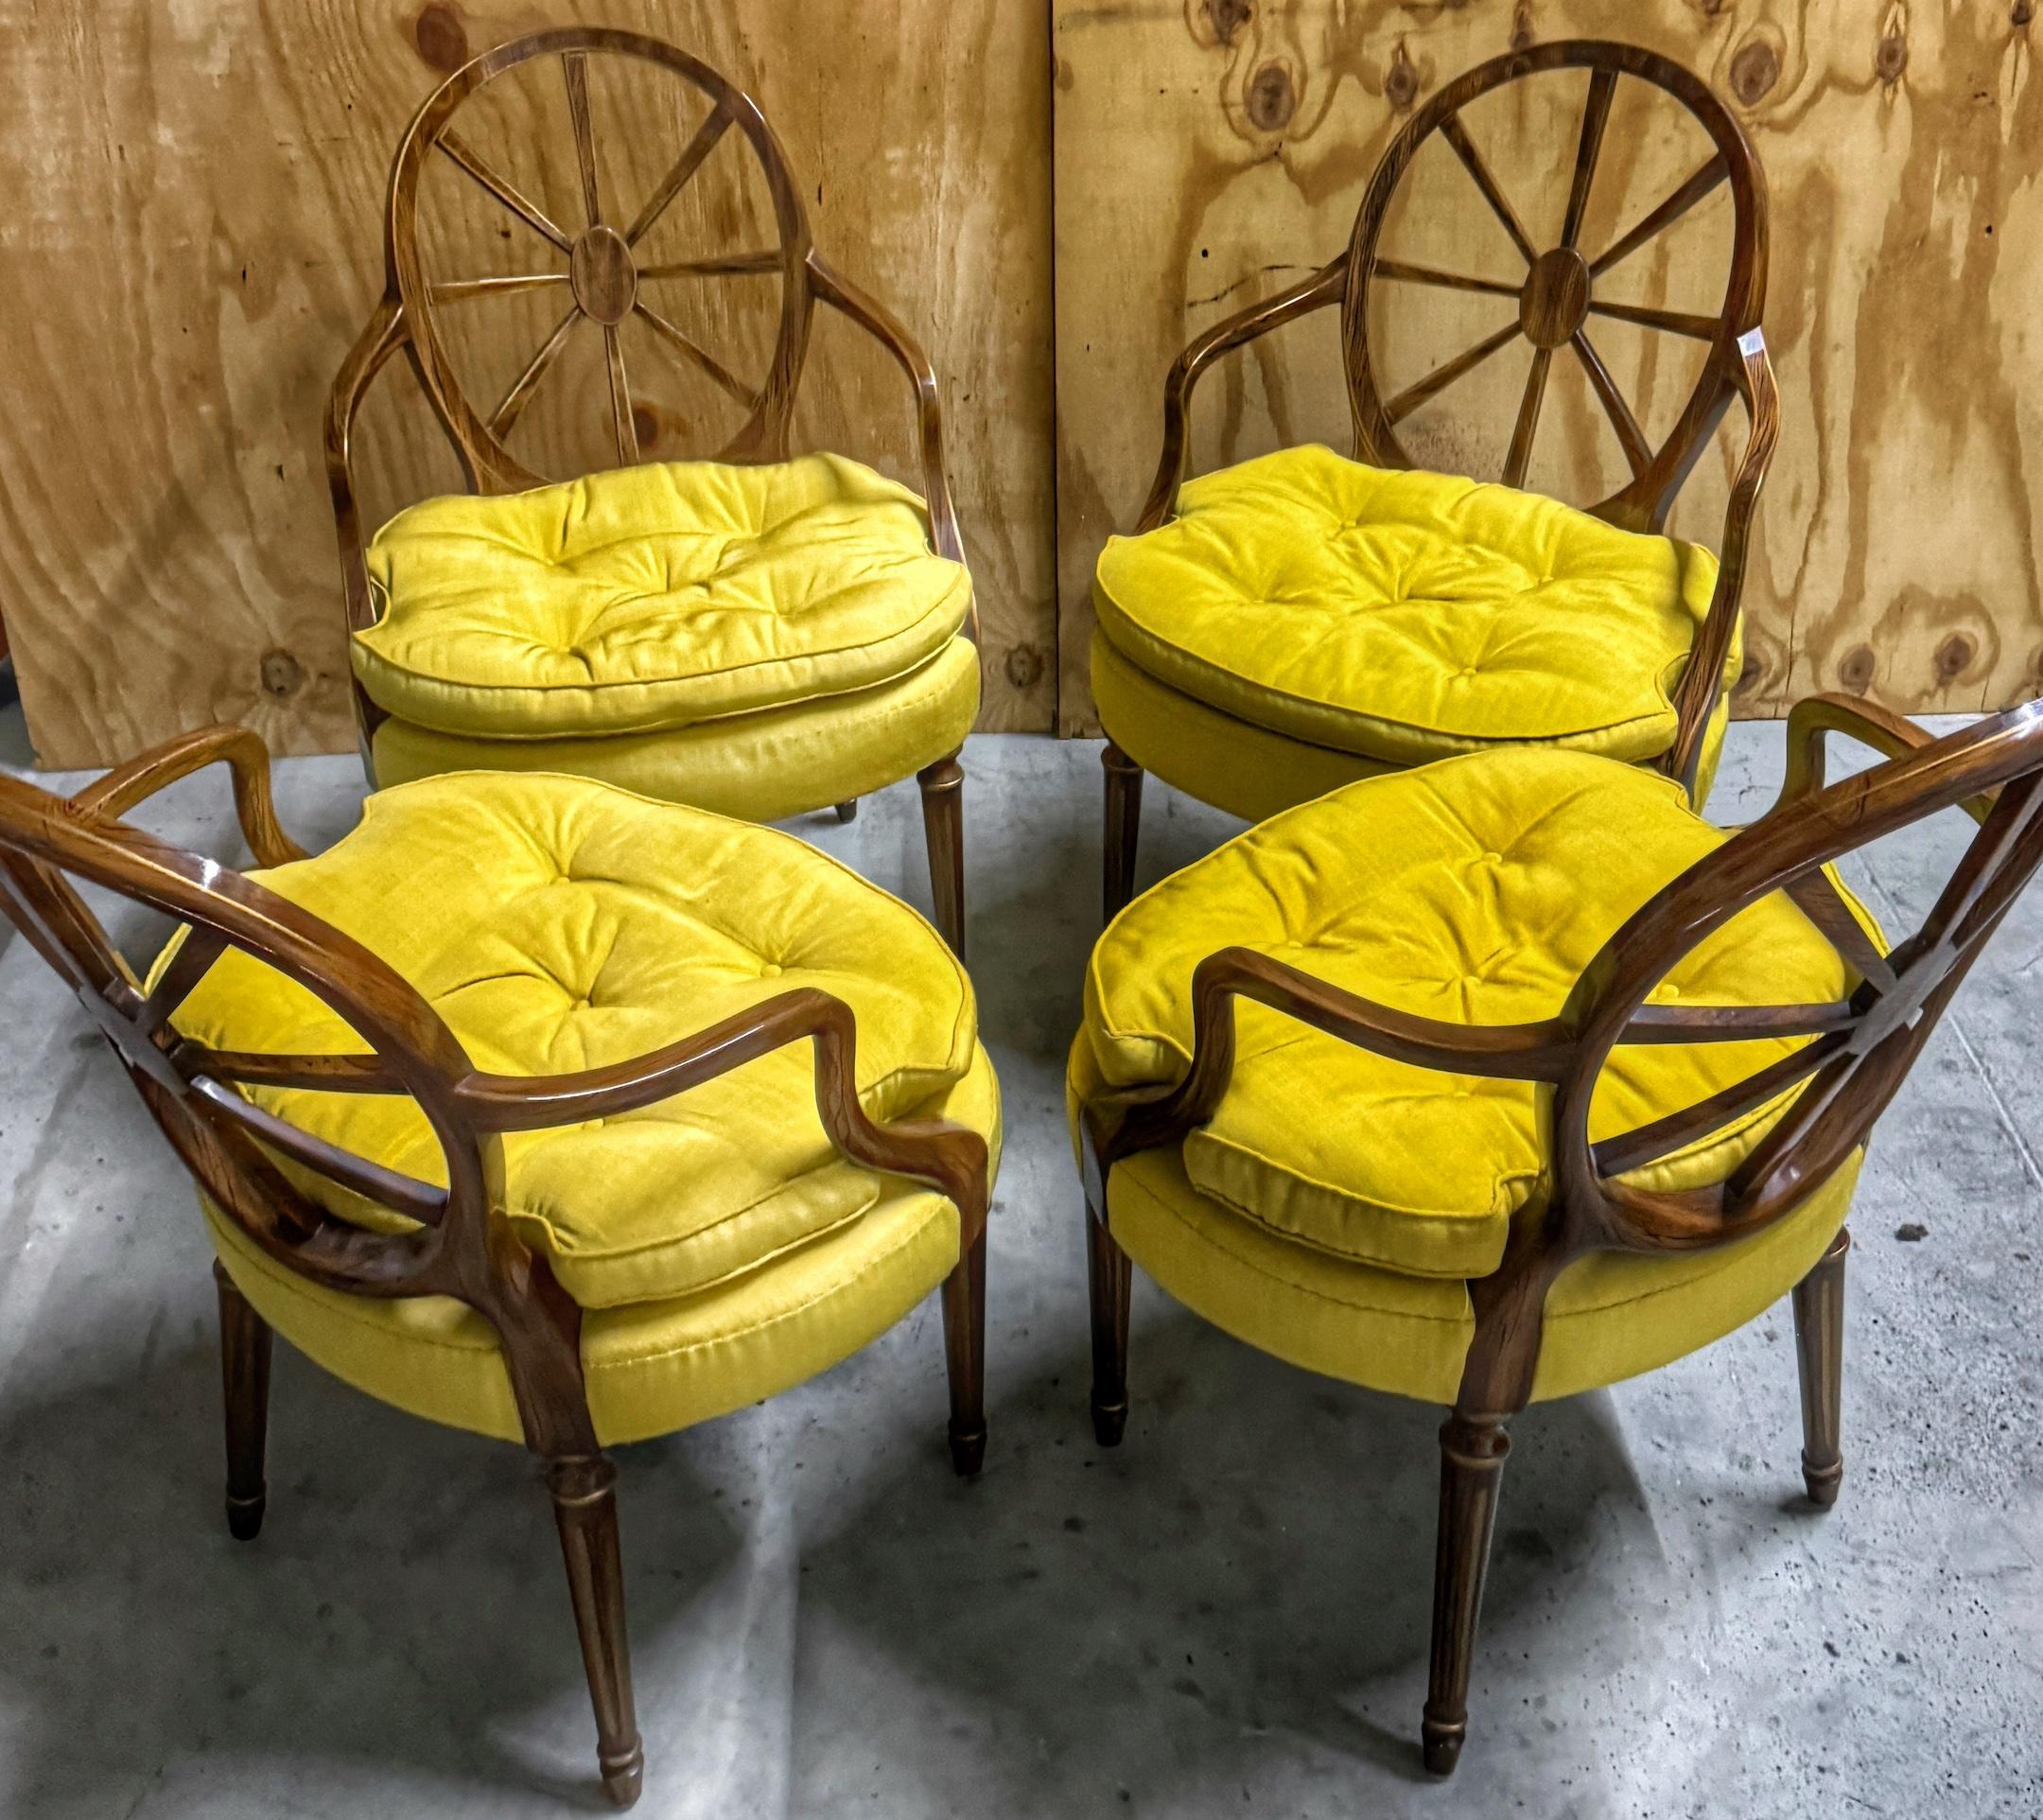 Billy Baldwin Attributed Regency Style Faux Rosewood Armchairs, Sold in Pairs 
Billy Baldwin Design Executed by Cocheo Brothers, for The Carriage House of Palm Beach 
USA, Post 1964

We are please to offer 2 Pair ( Four chairs) Billy Baldwin